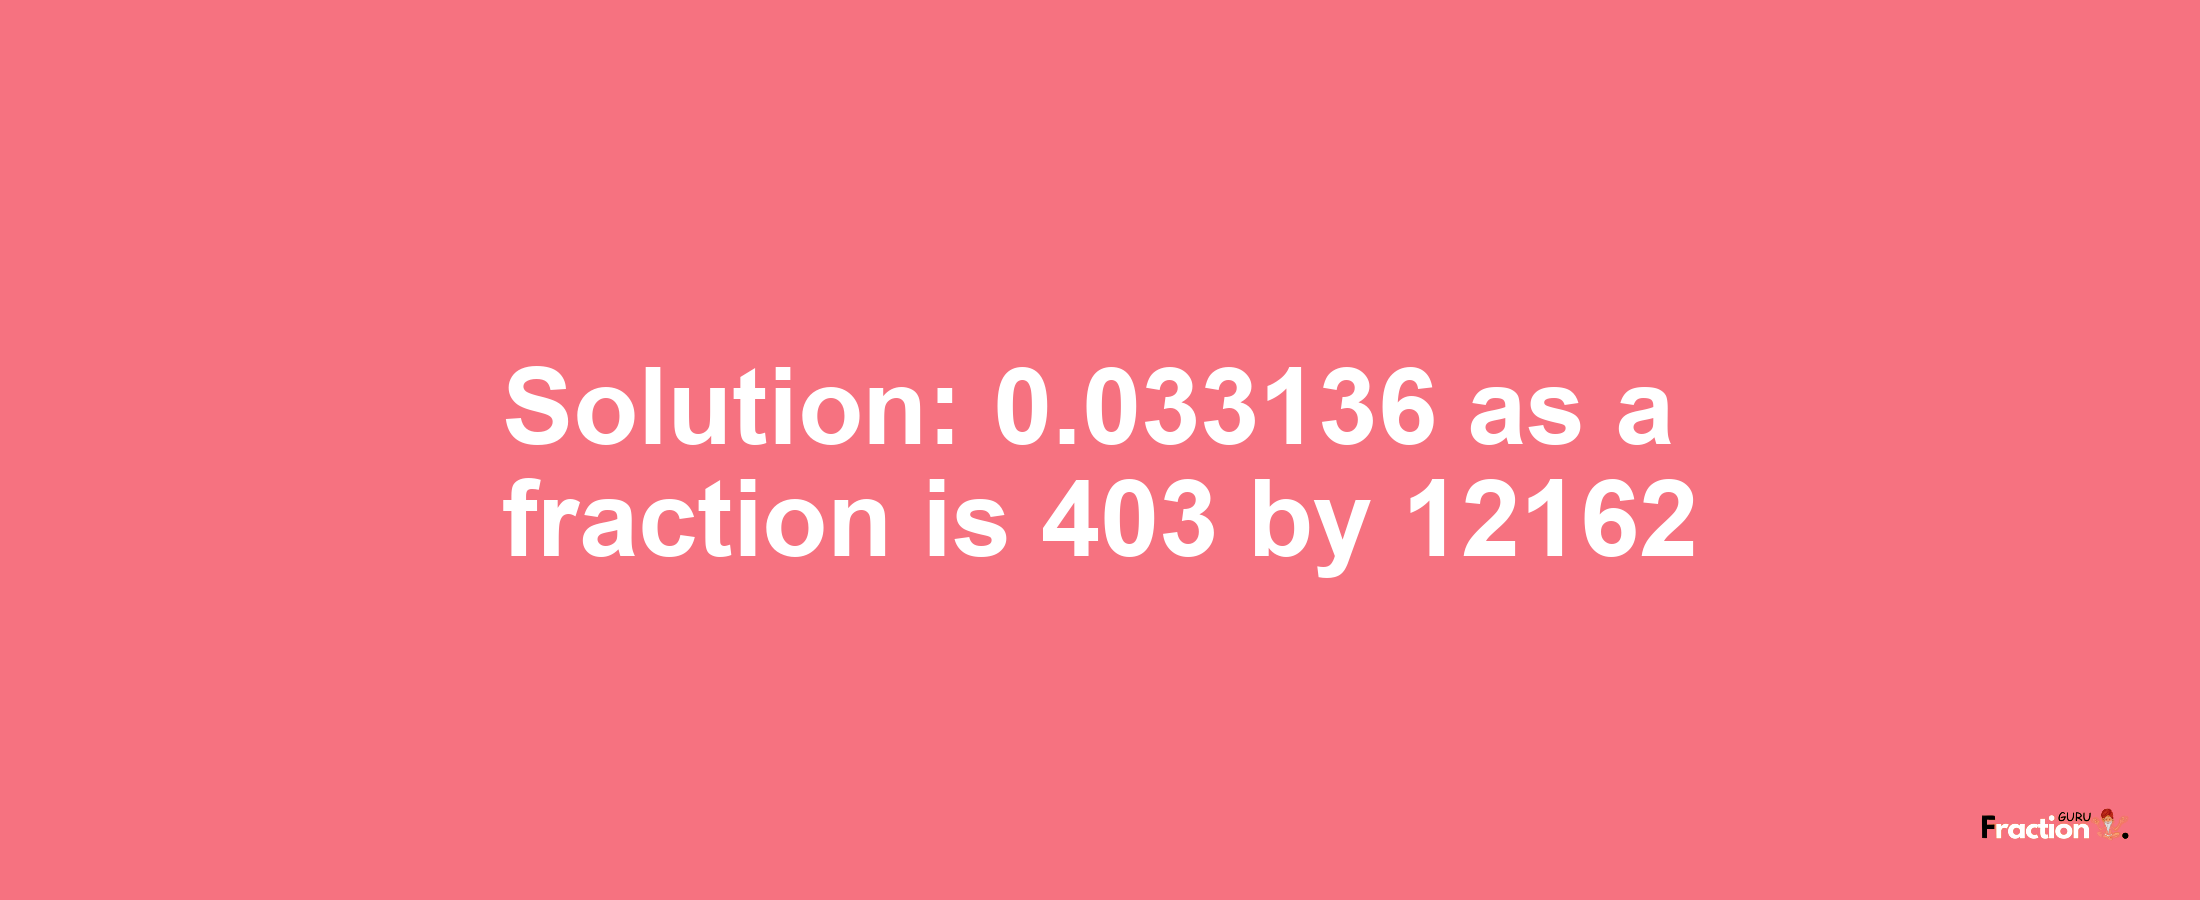 Solution:0.033136 as a fraction is 403/12162